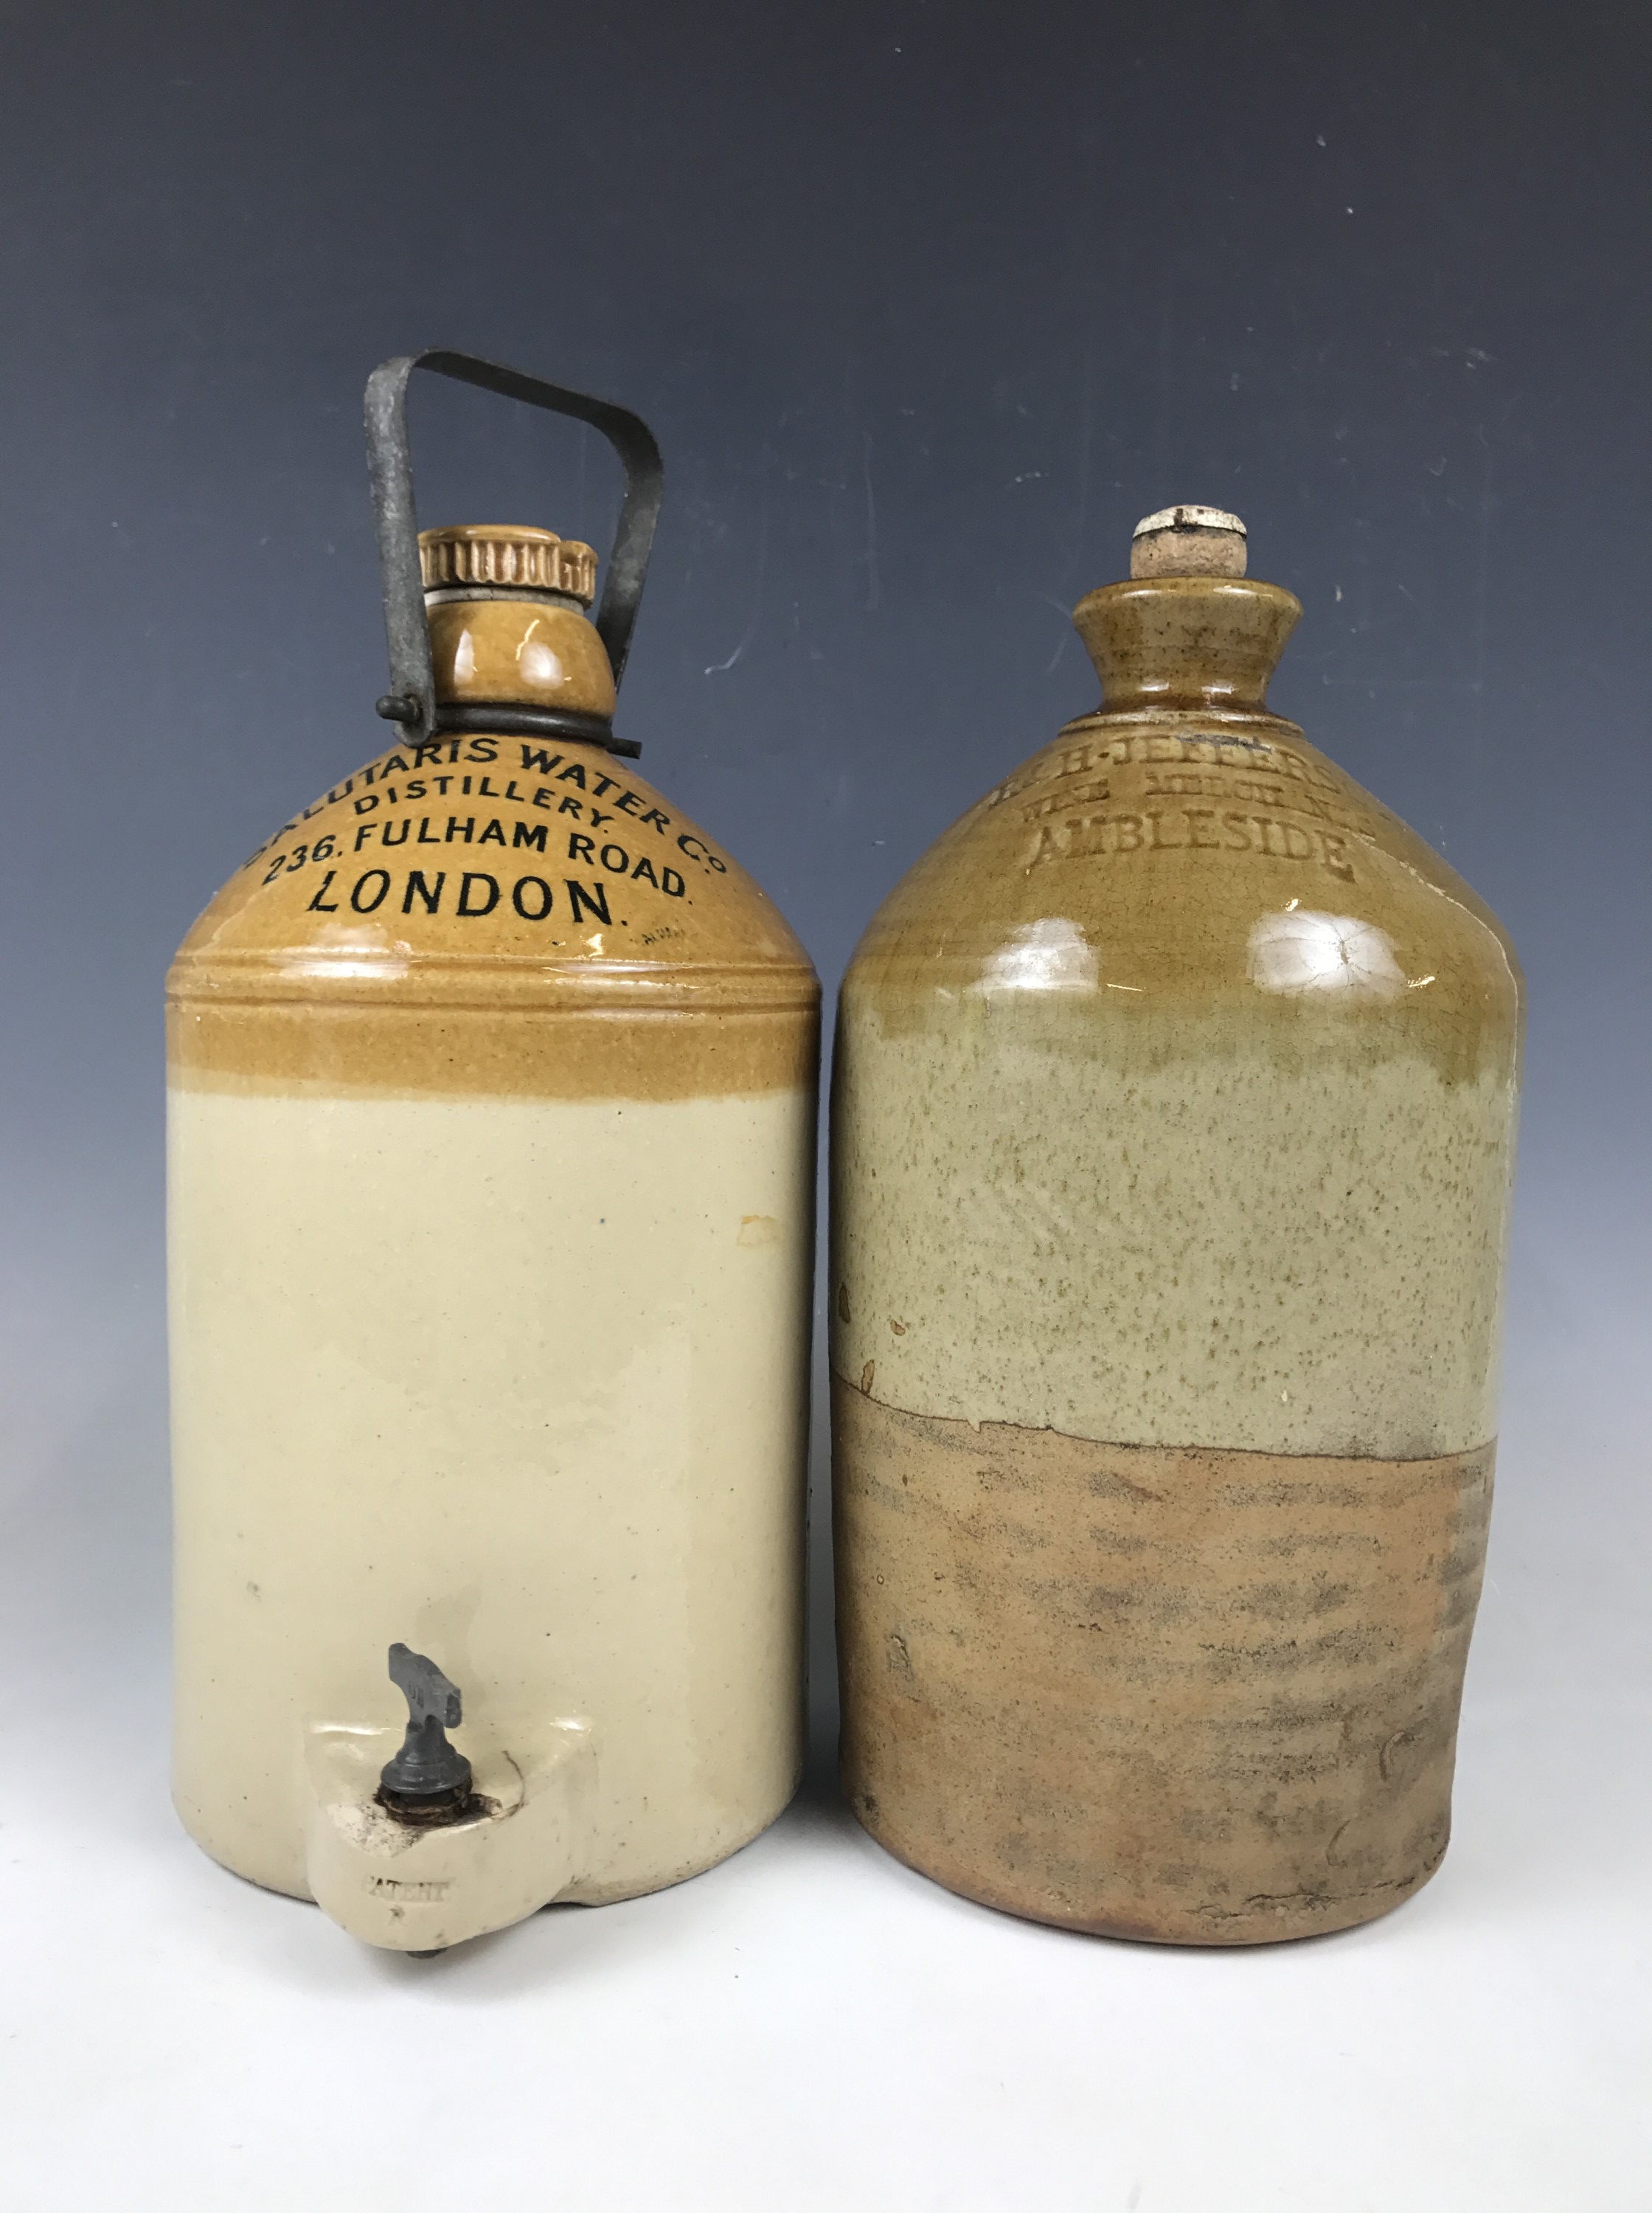 A stoneware flagon with tap, printed "Salutaris Water Co Distillery, 236 Fulham Road, London",